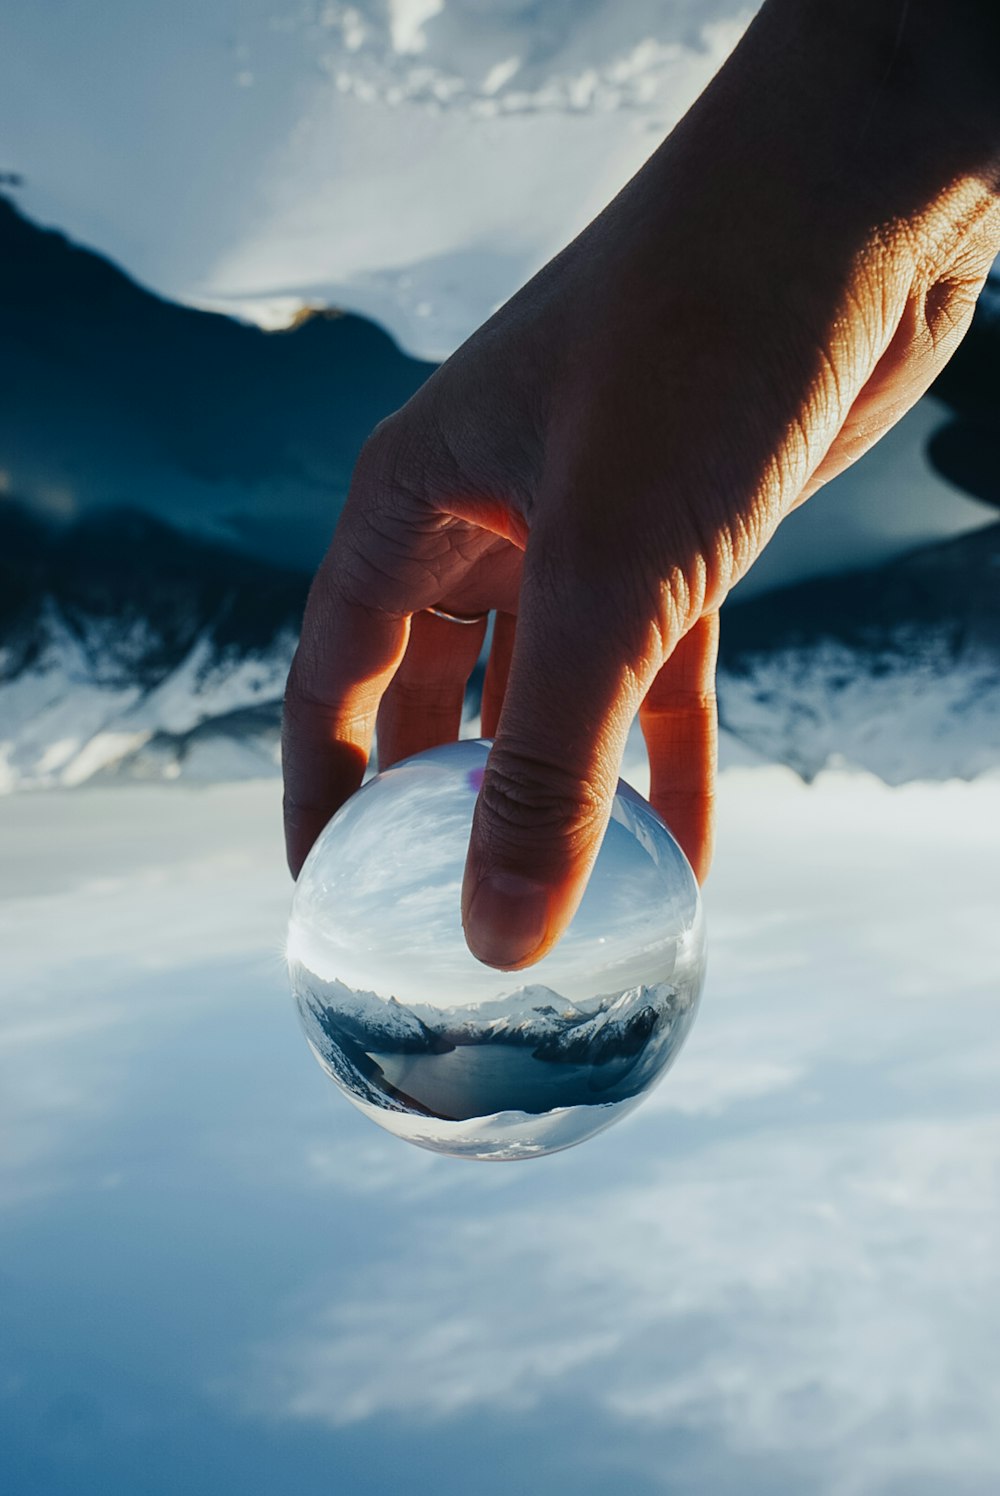 a person's hand touching a glass ball in the snow